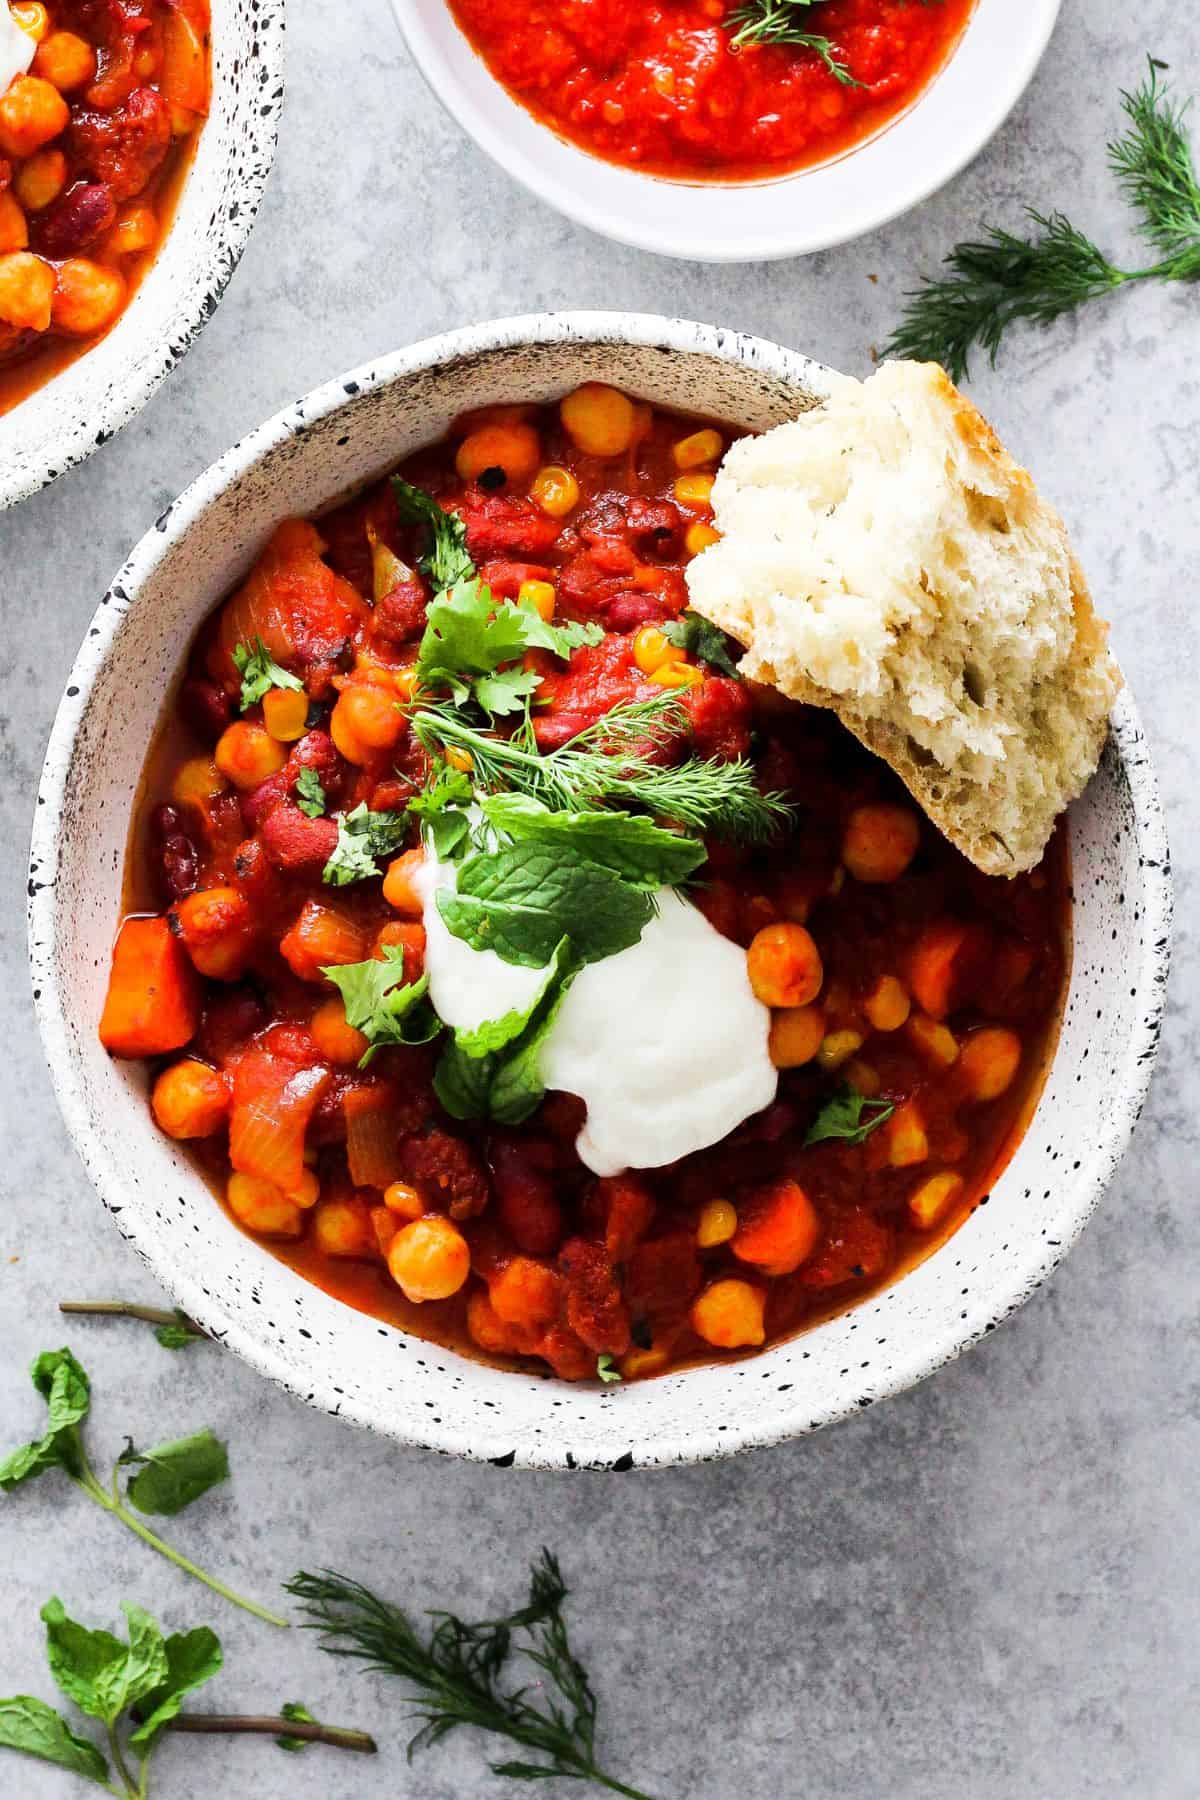 Chickpea chili with harissa paste served with a piece of bread.